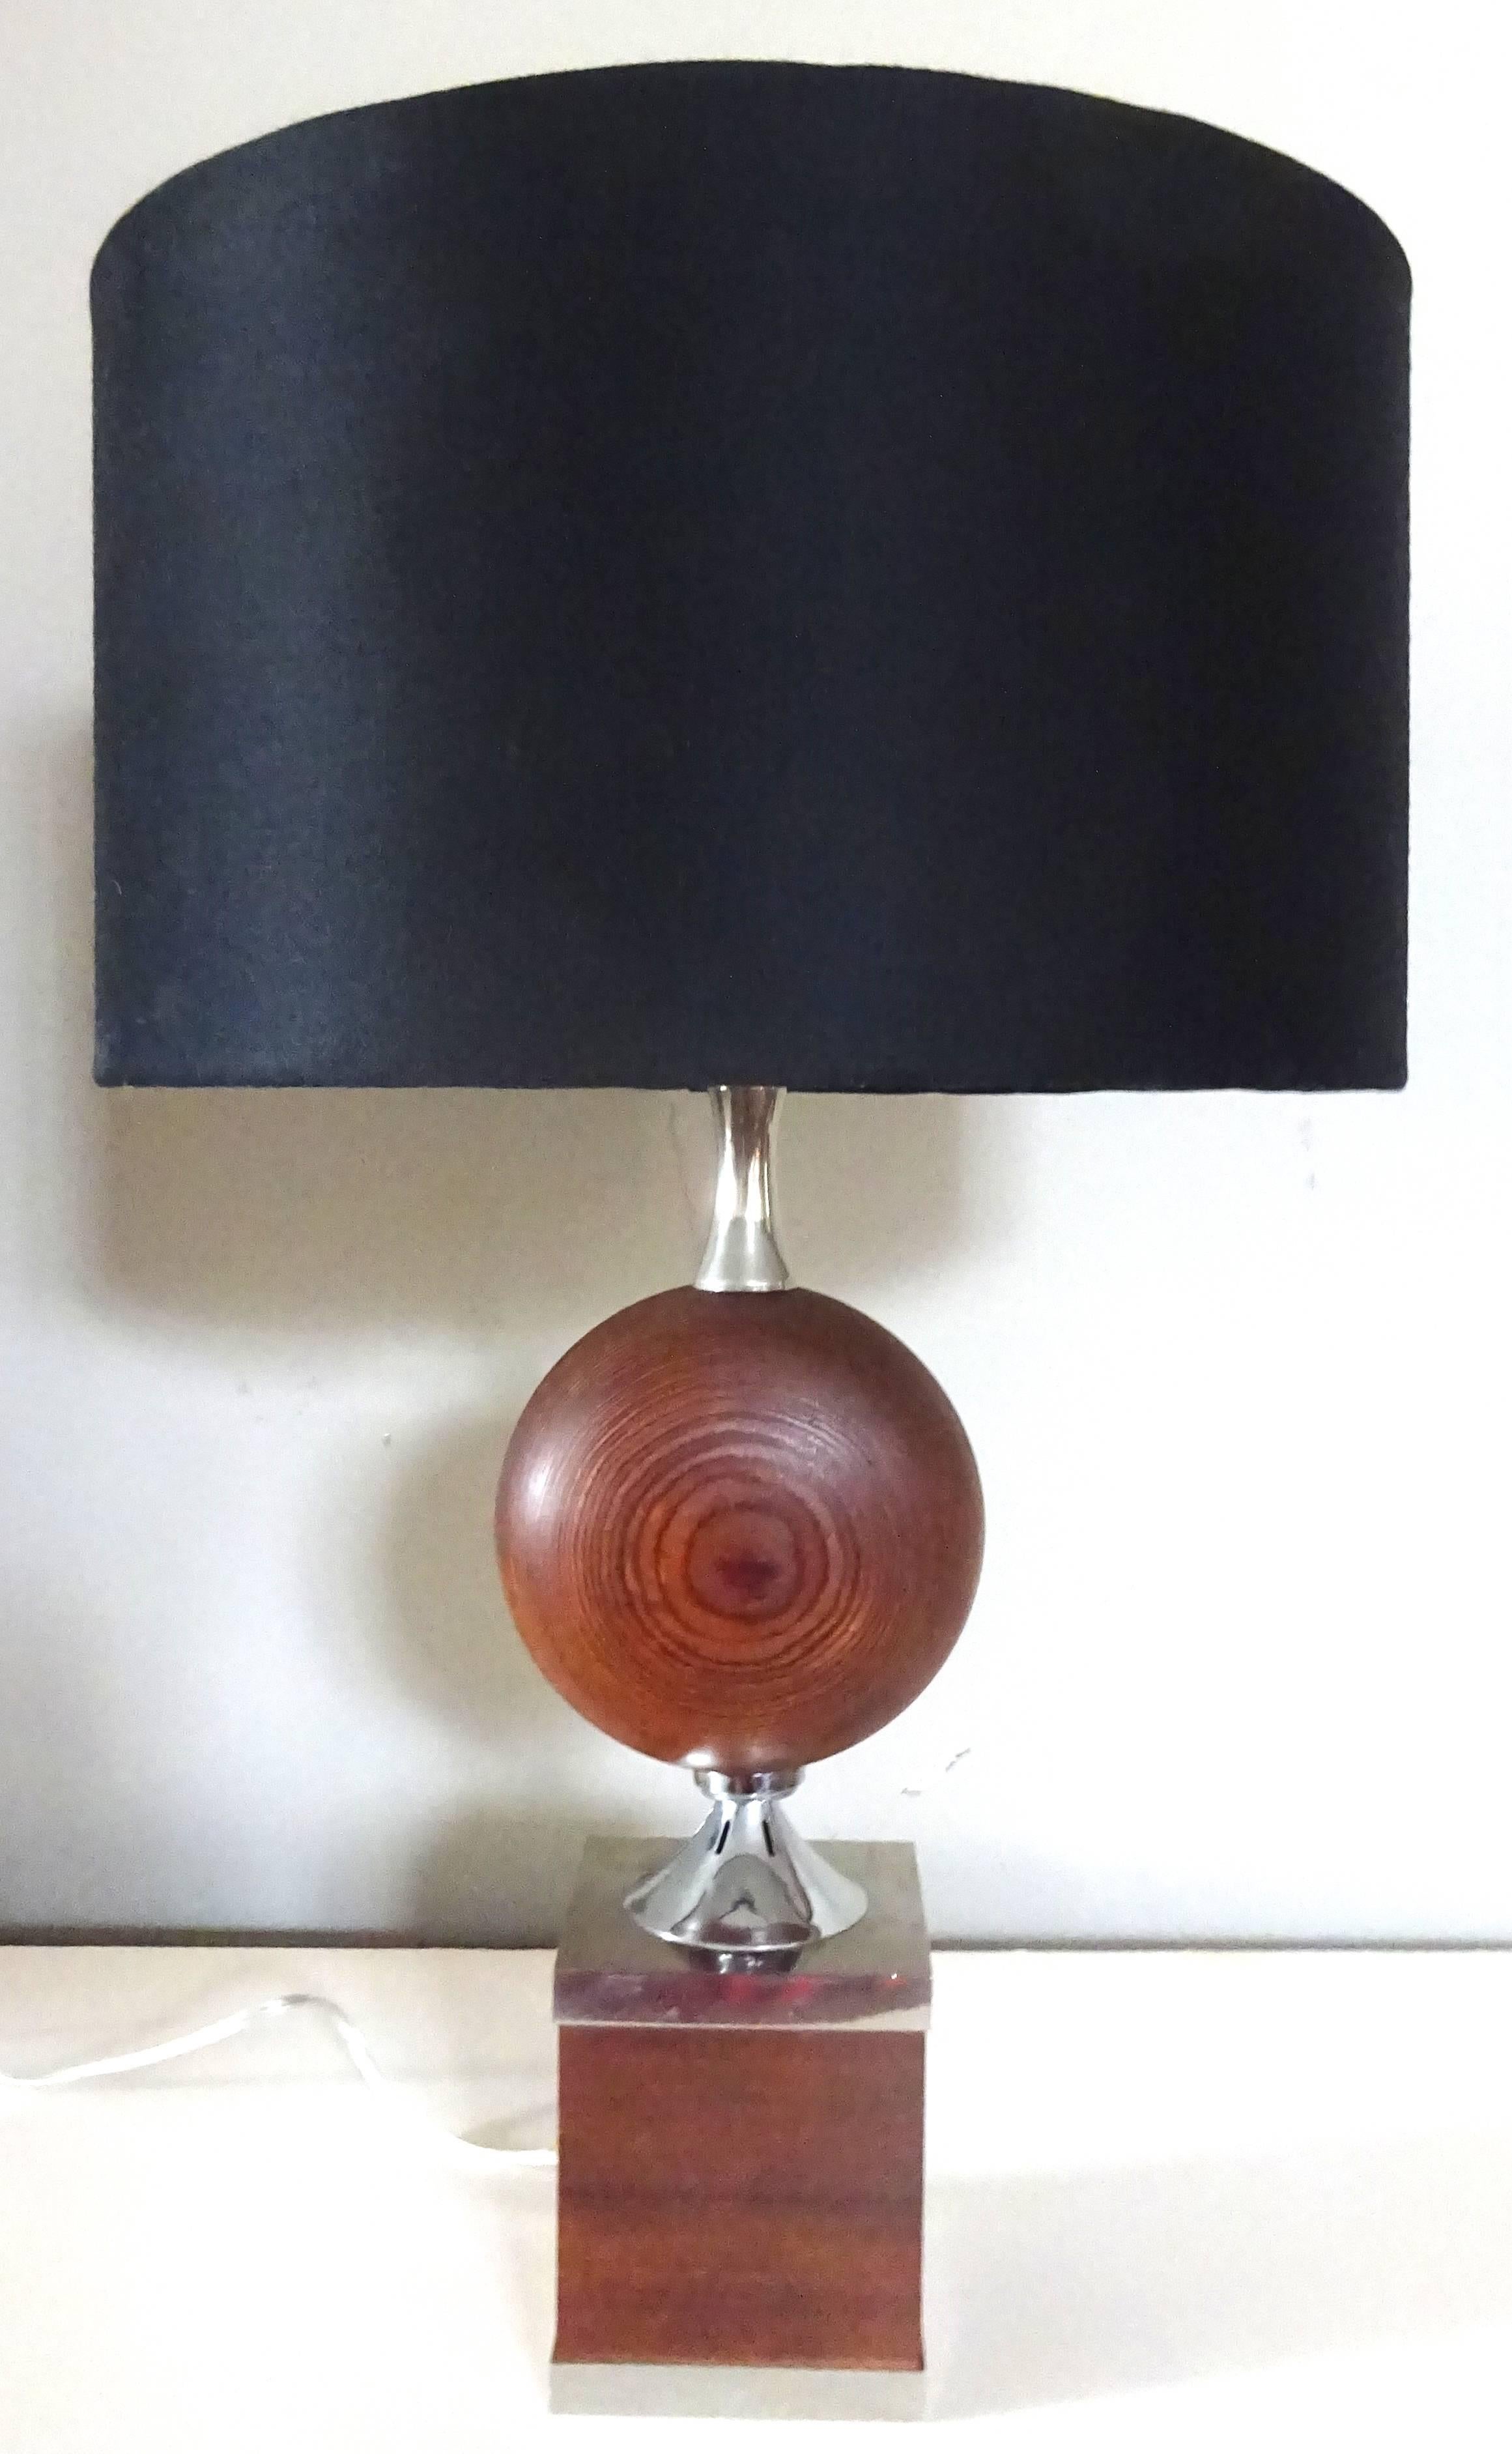 Rare 1970s French Maison Barbier Laminated Wood and Chrome Table Lamp In Excellent Condition For Sale In Washington, DC